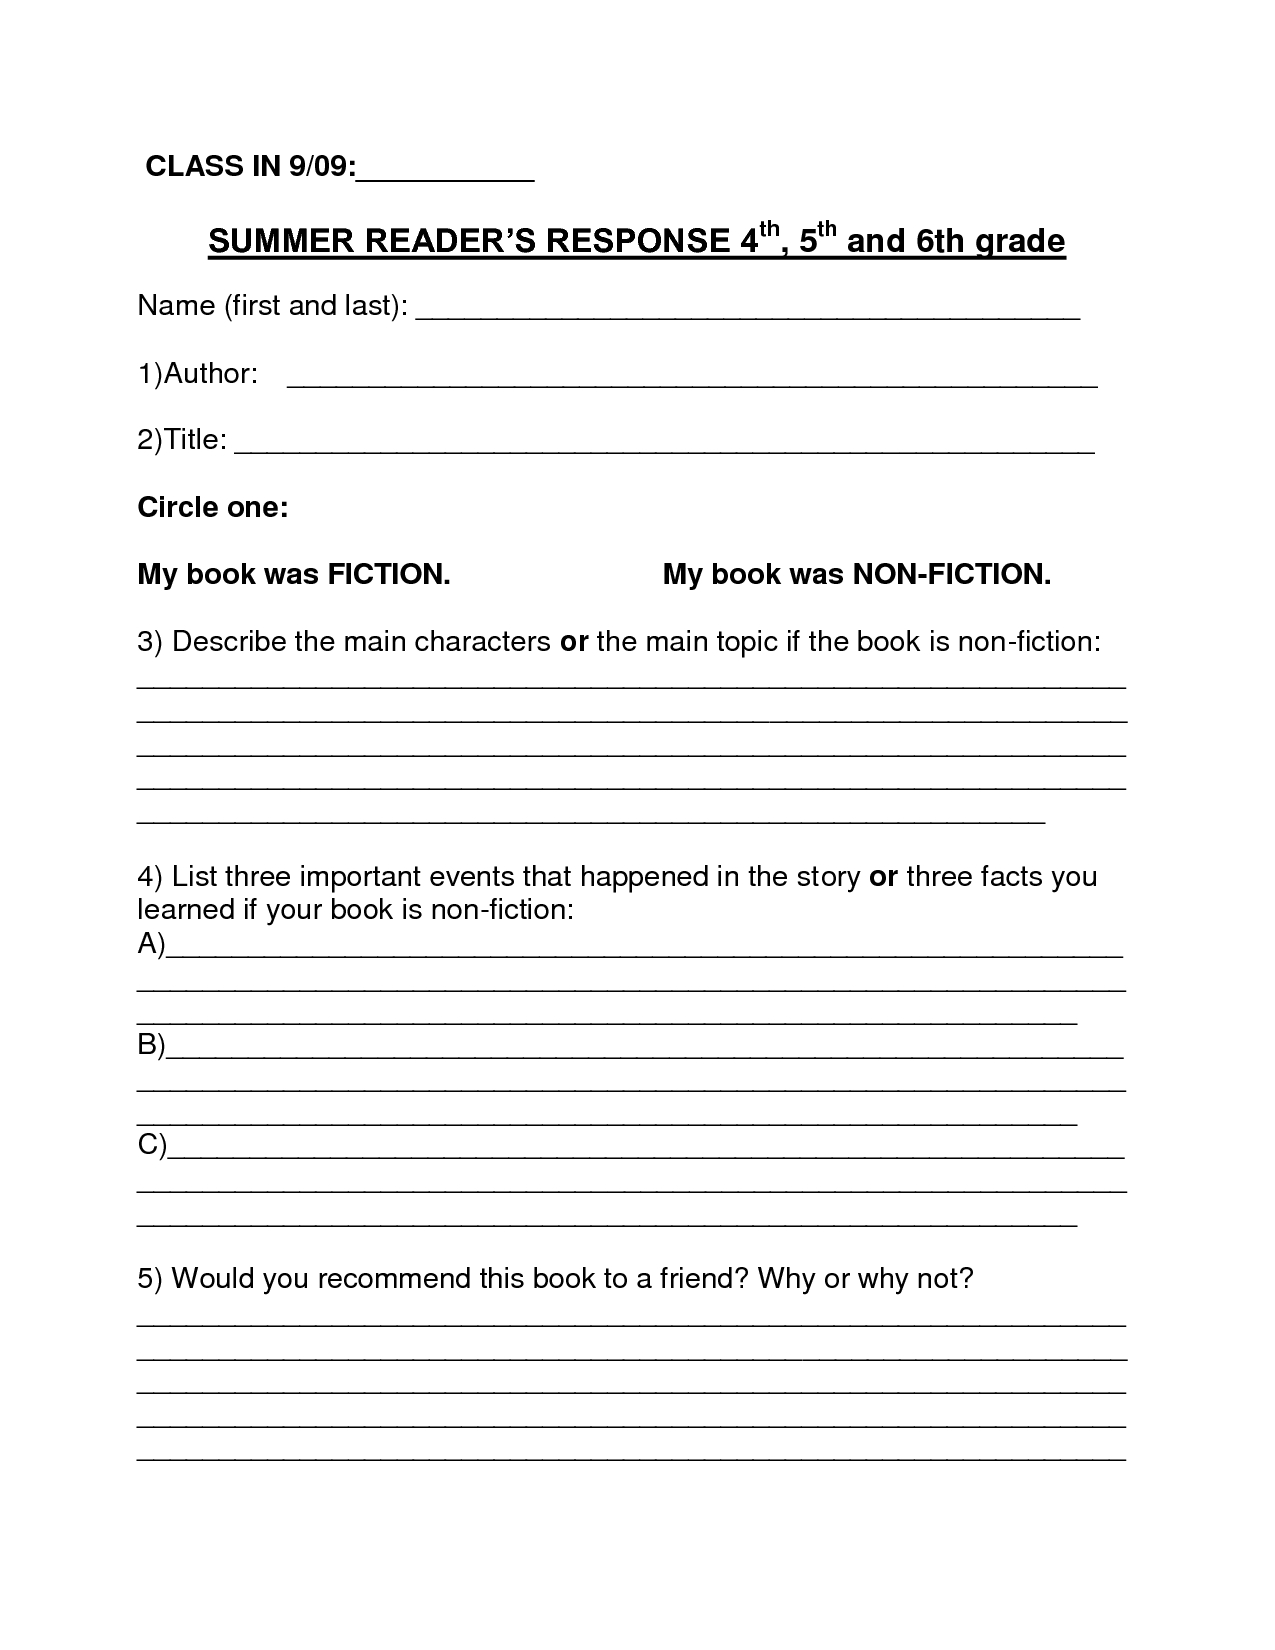 Image Result For Book Report Summer Reading Form 6Th Grade Regarding Book Report Template Middle School